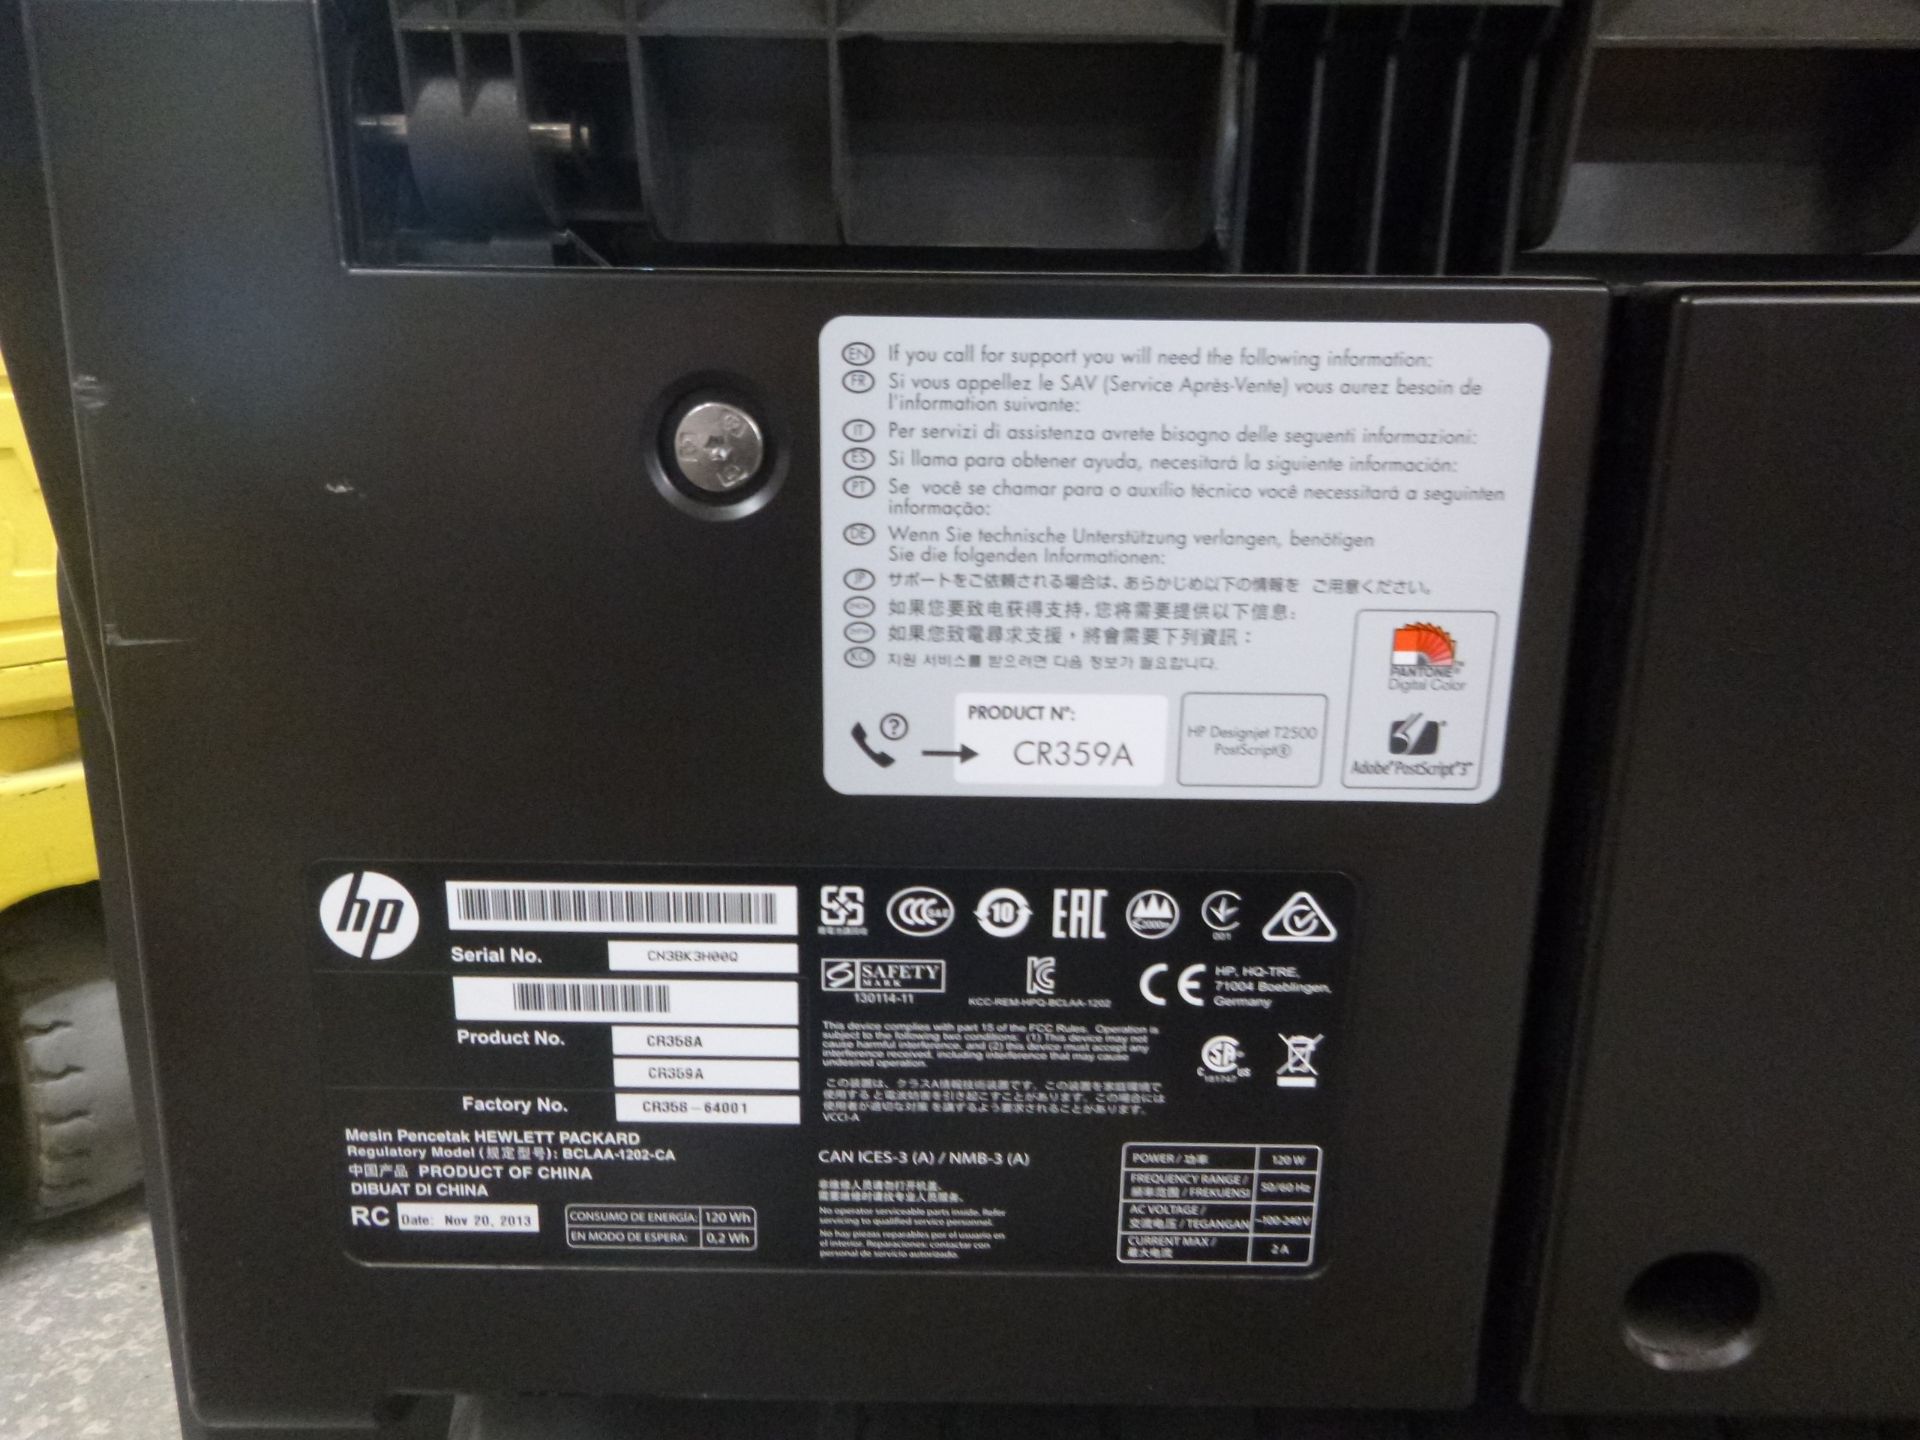 HP DESIGNJET T2500 WIDE FORMAT PRINTER/PLOTTER. WITH TEST PRINT - Image 5 of 7